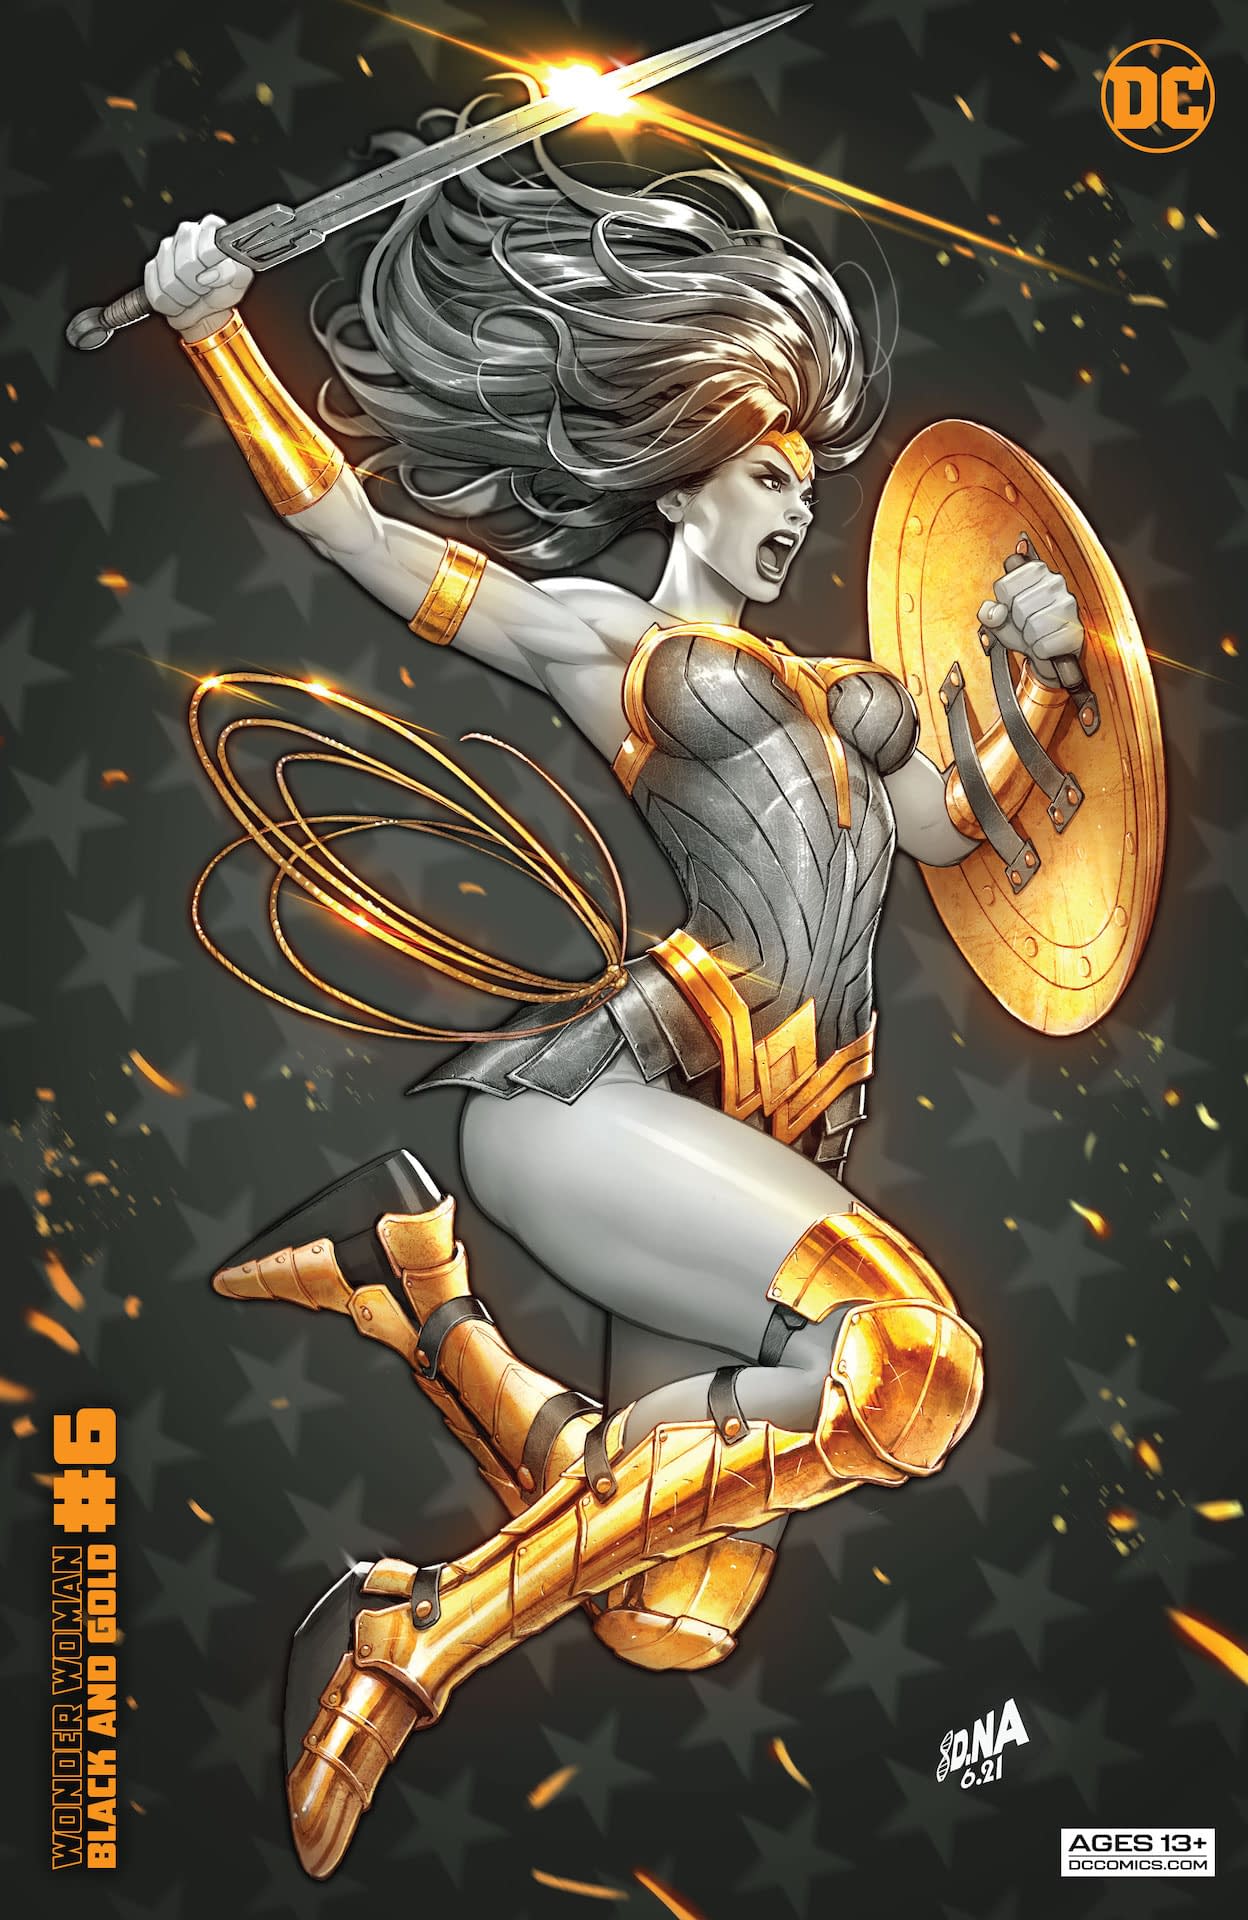 DC Comics WONDER WOMAN BLACK AND GOLD #6 first printing cover A